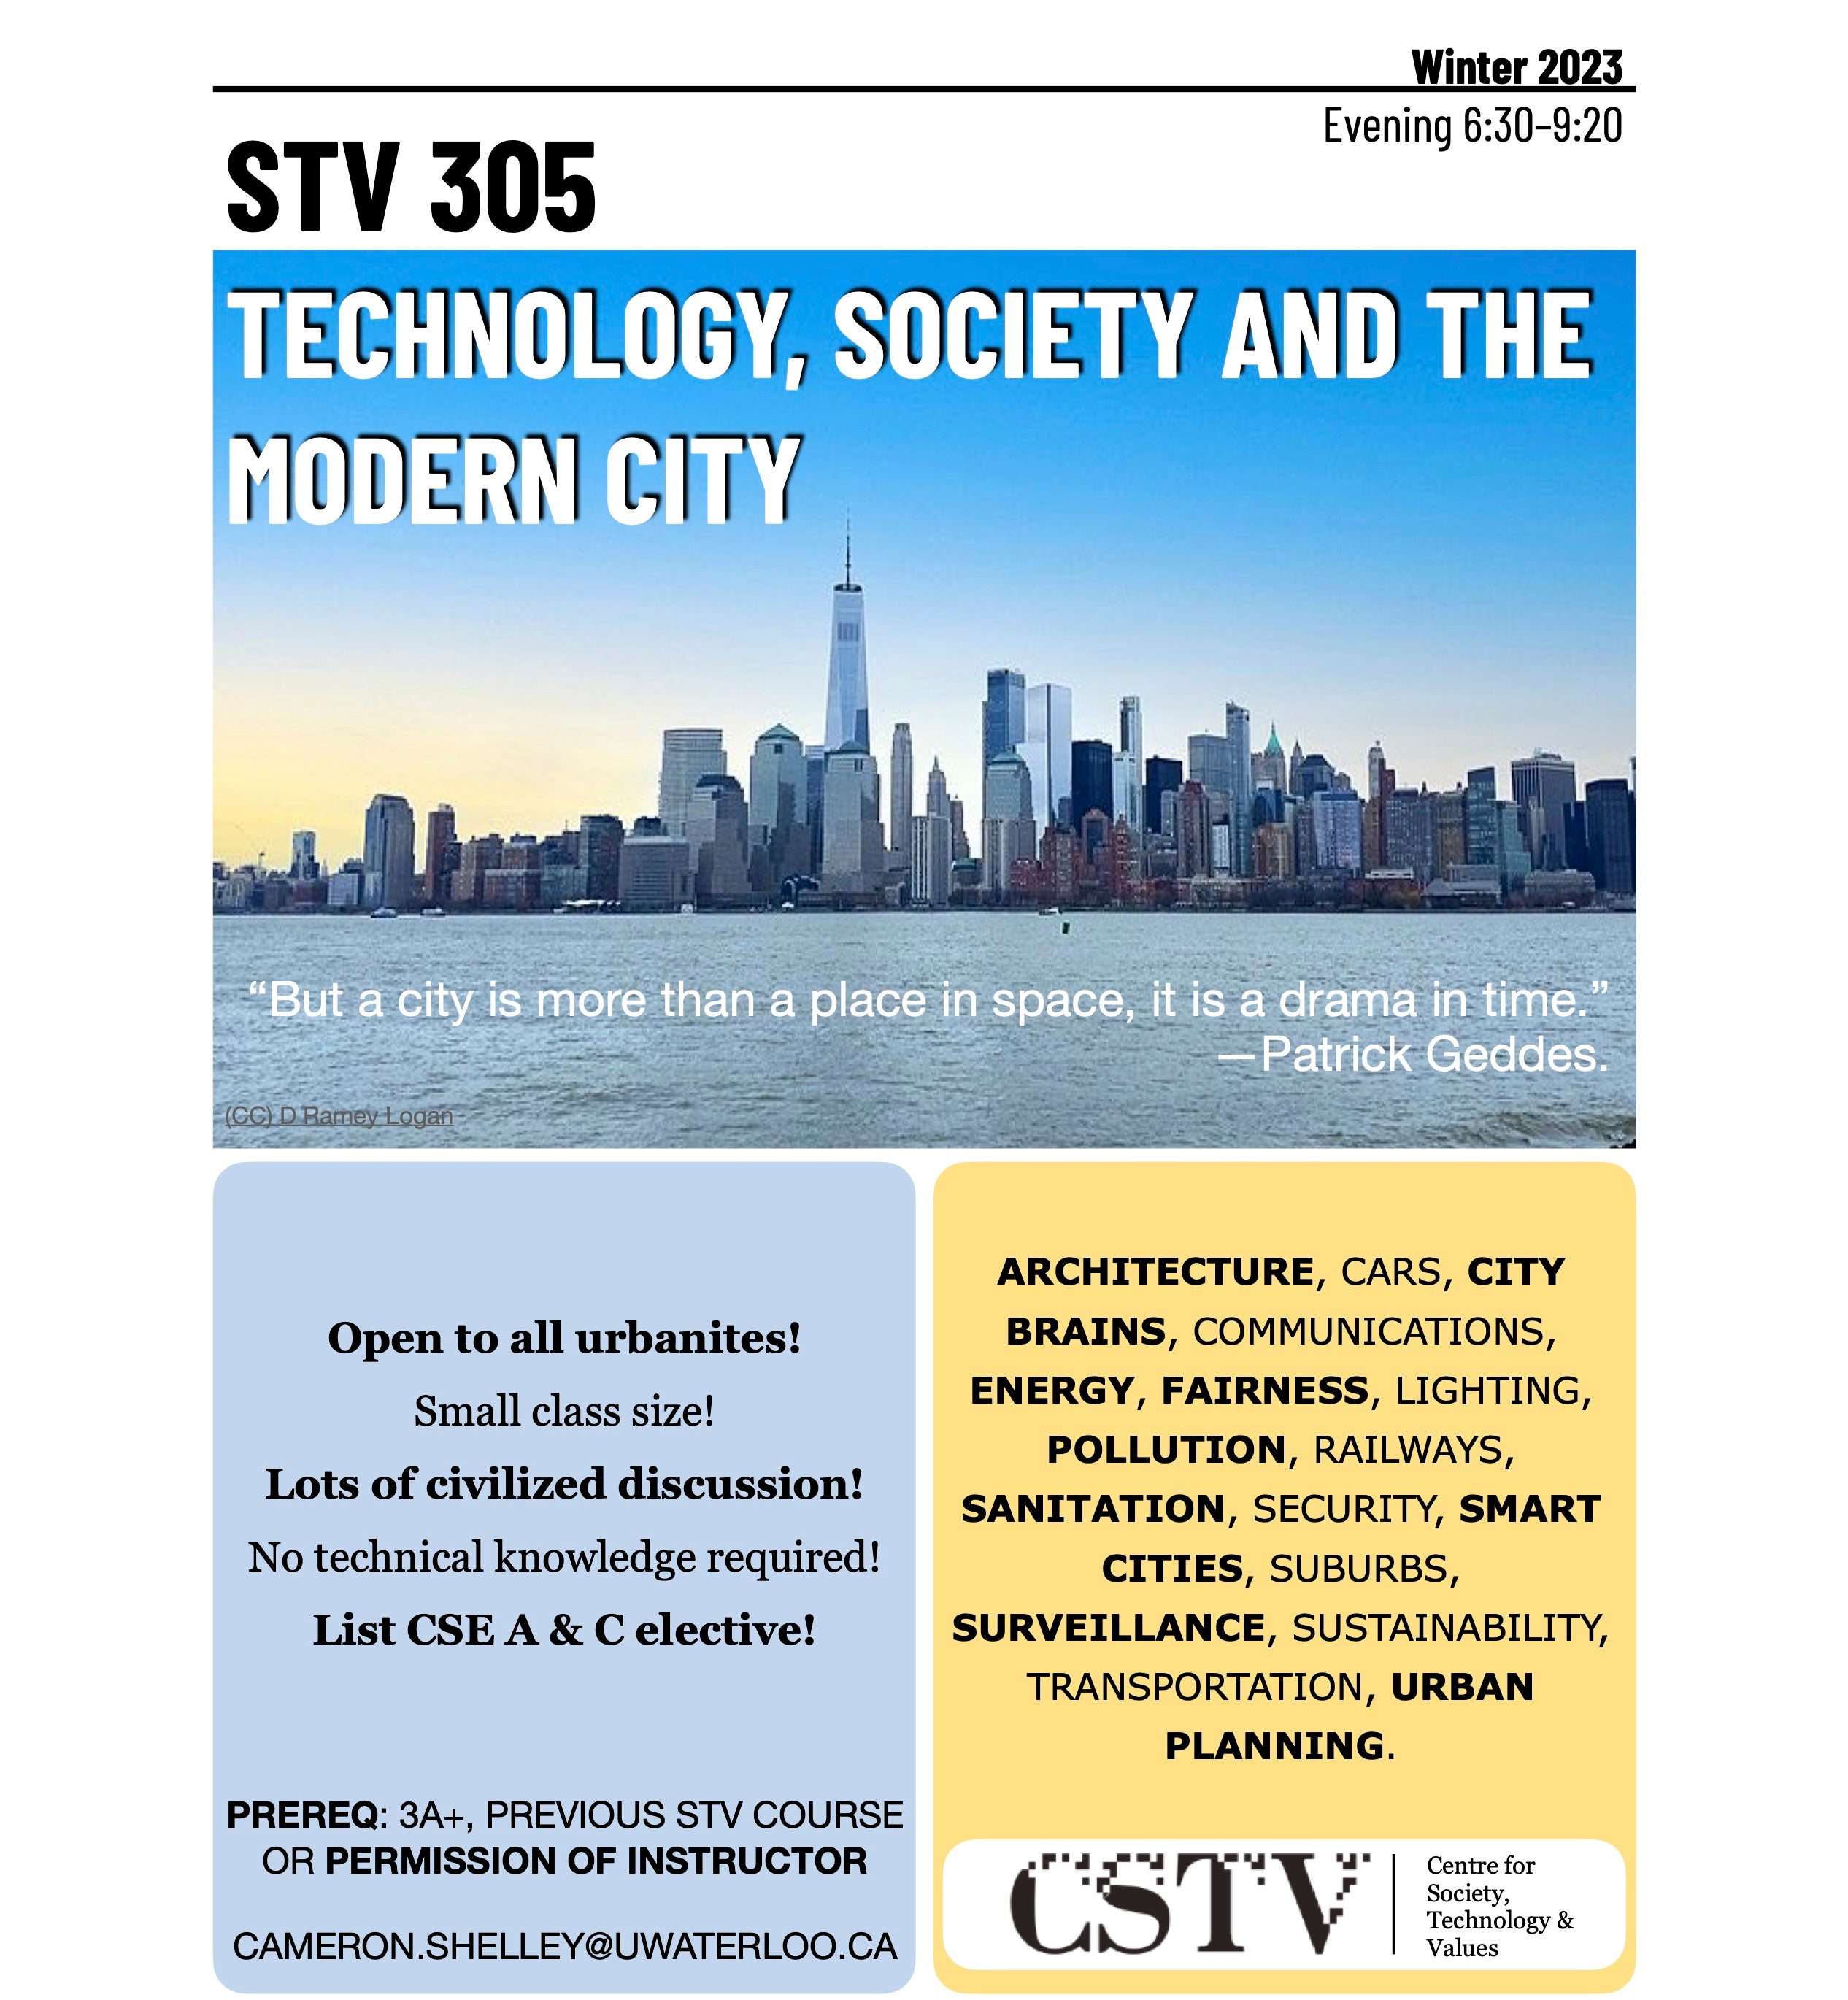 Poster showing a city and a description of STV 305.